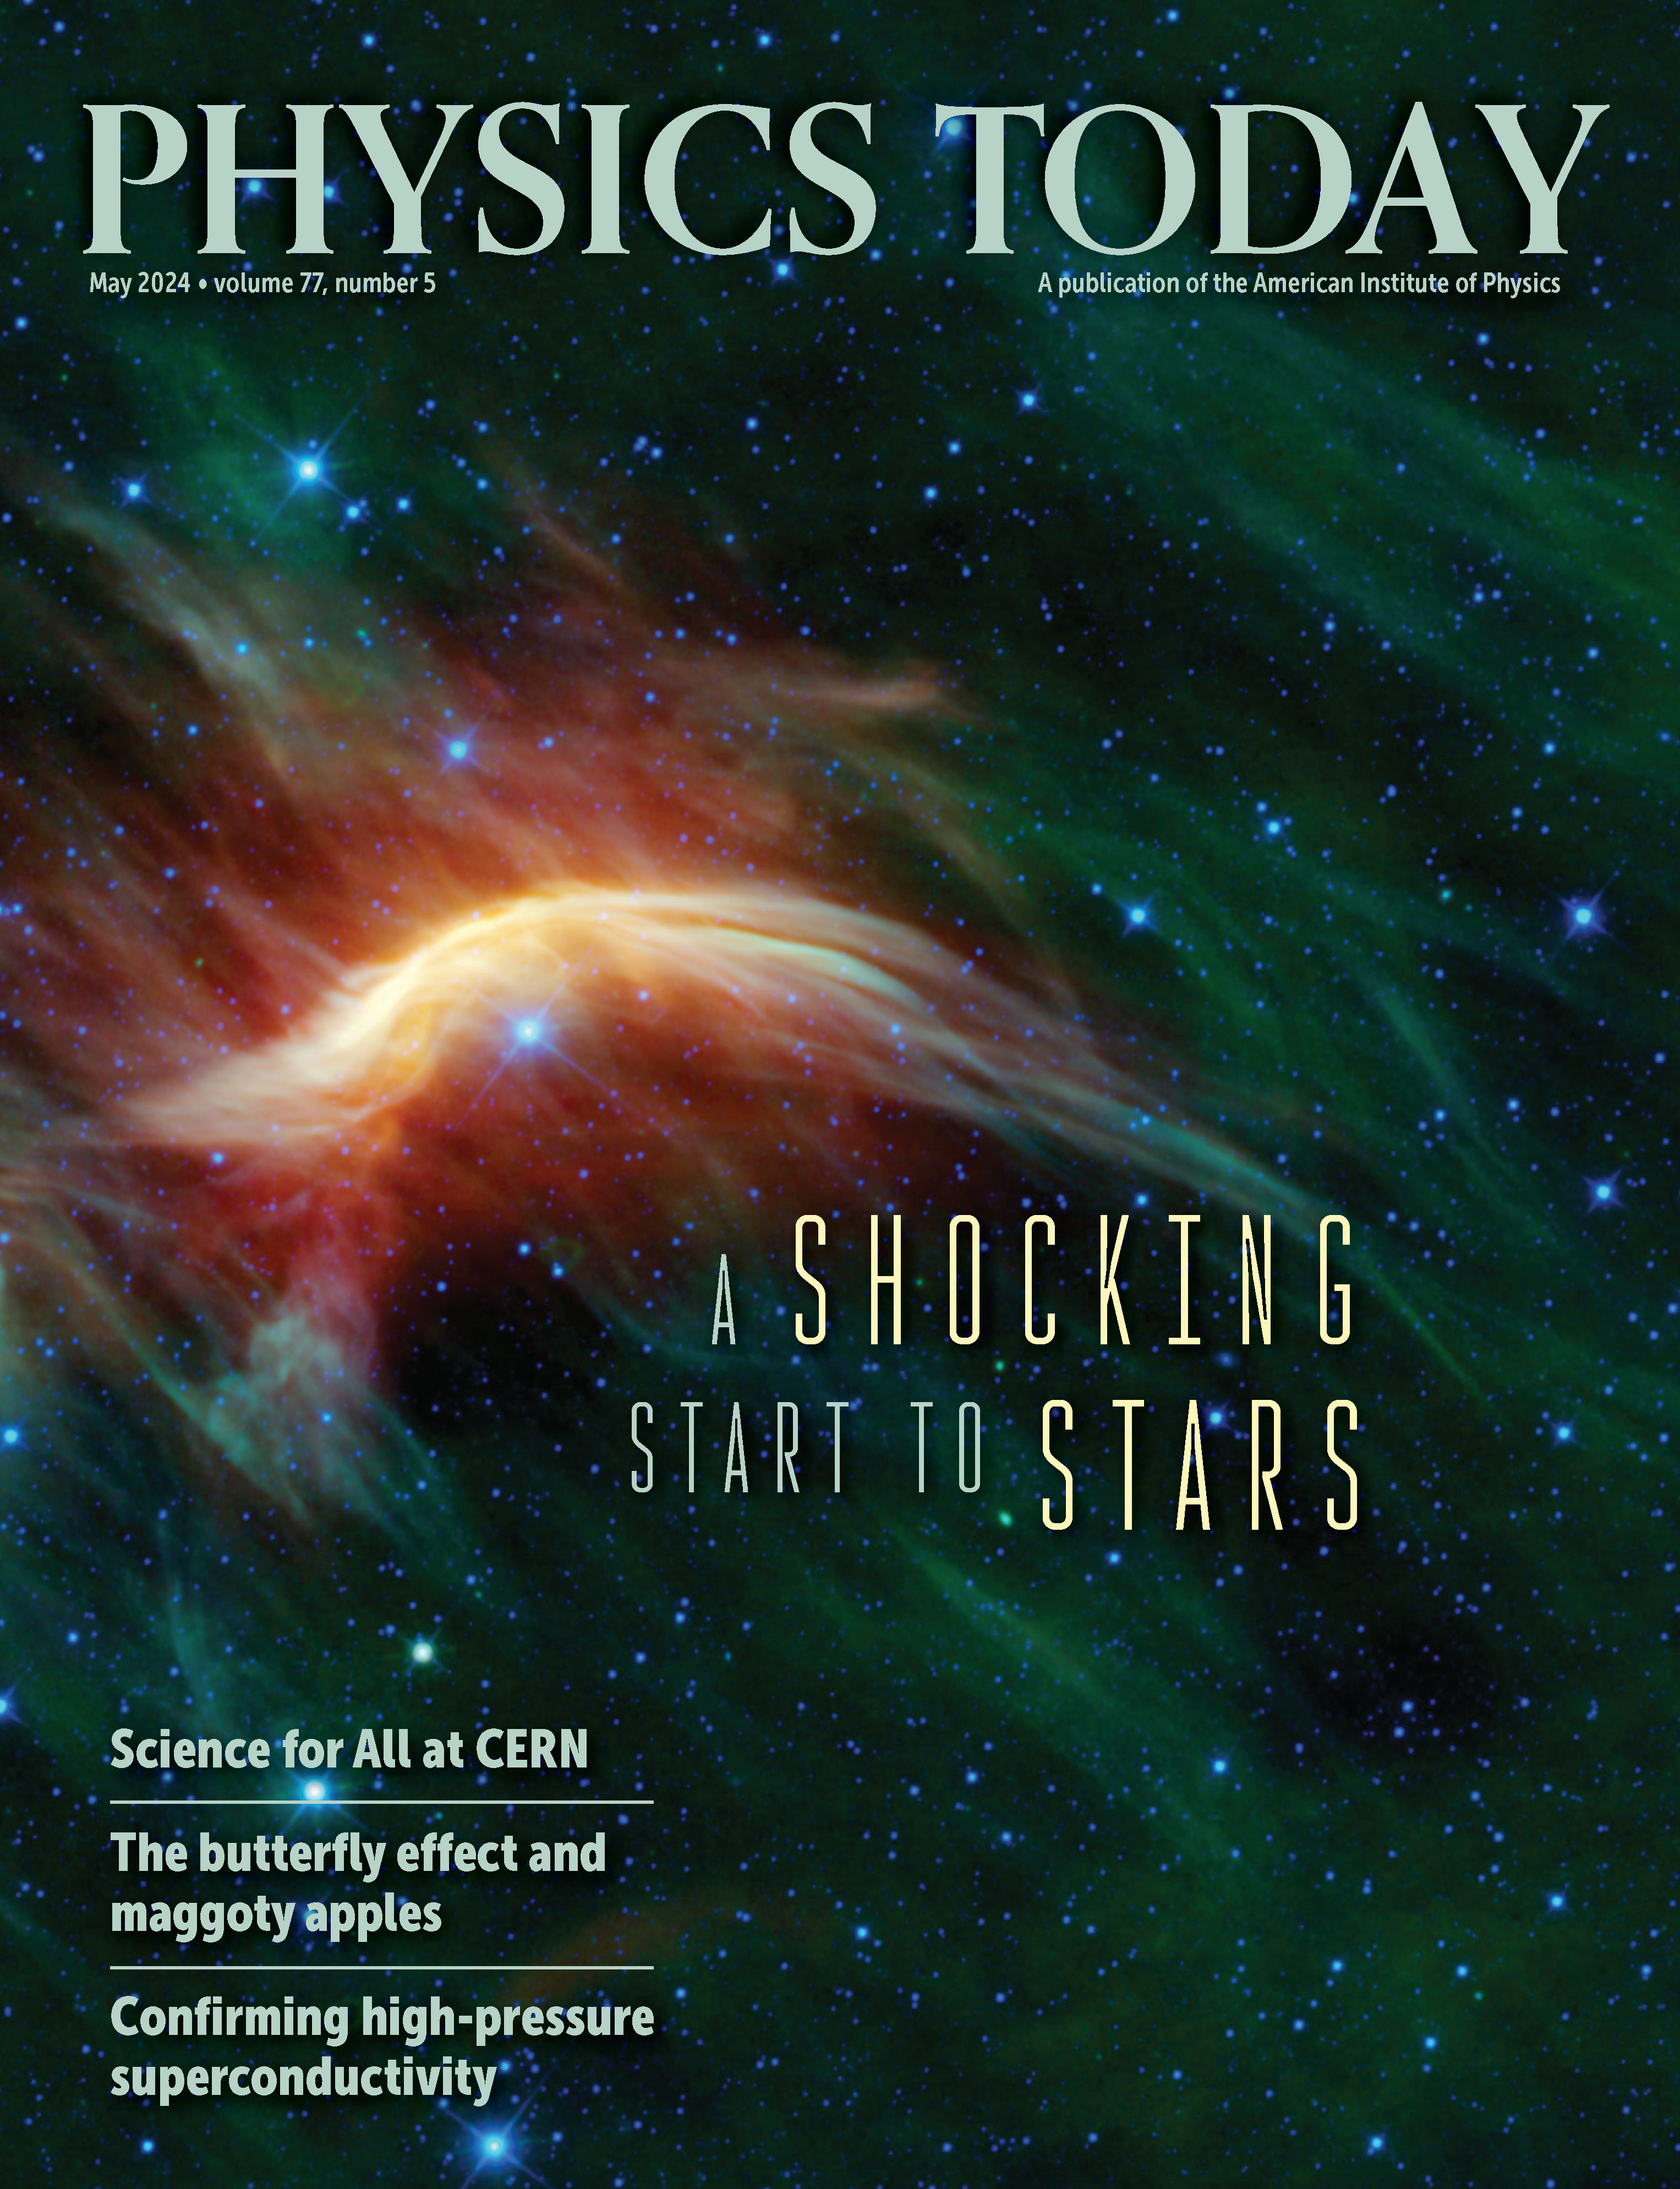 May 2024 Physics Today cover